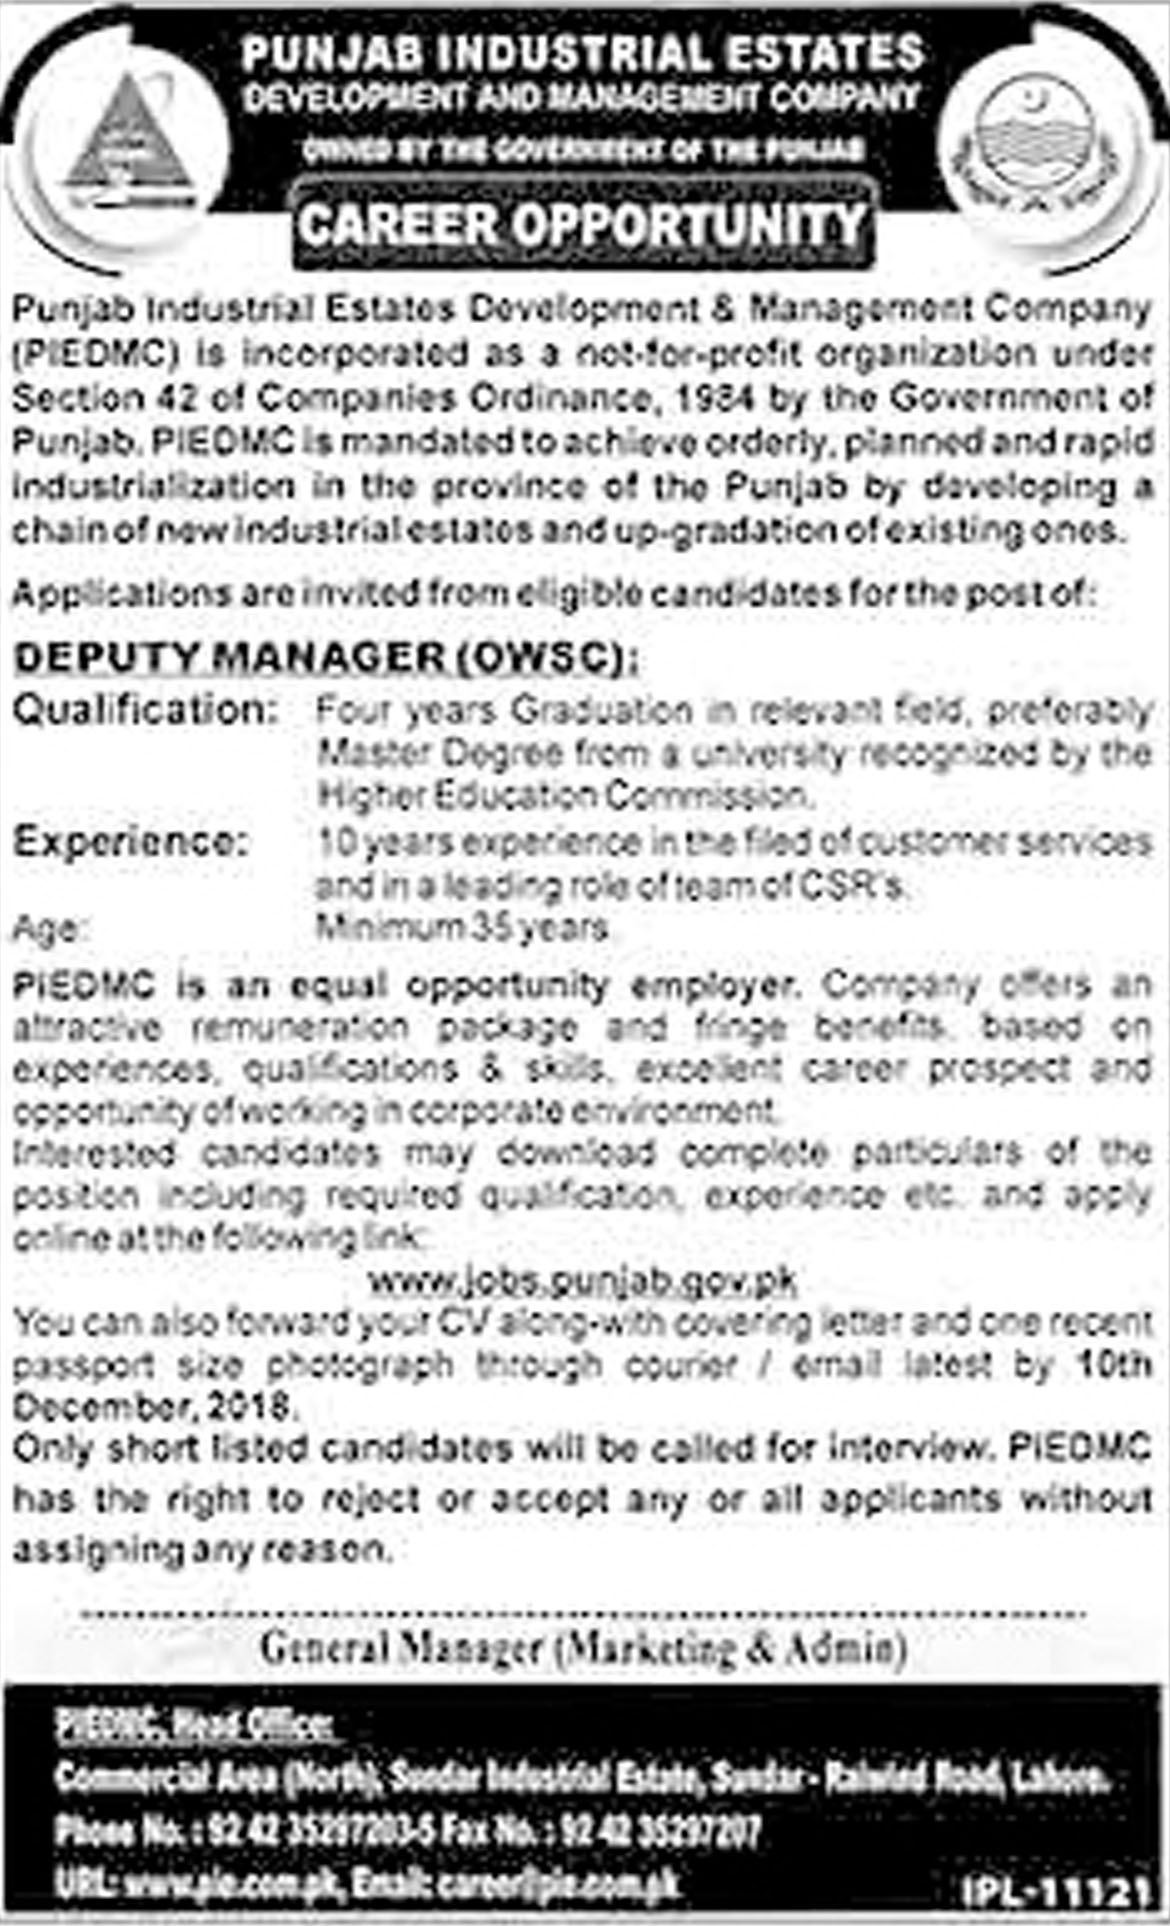 Jobs Announces In Punjab Industrial Estate Development And Management Company (PIE) At 27 Nov 2018